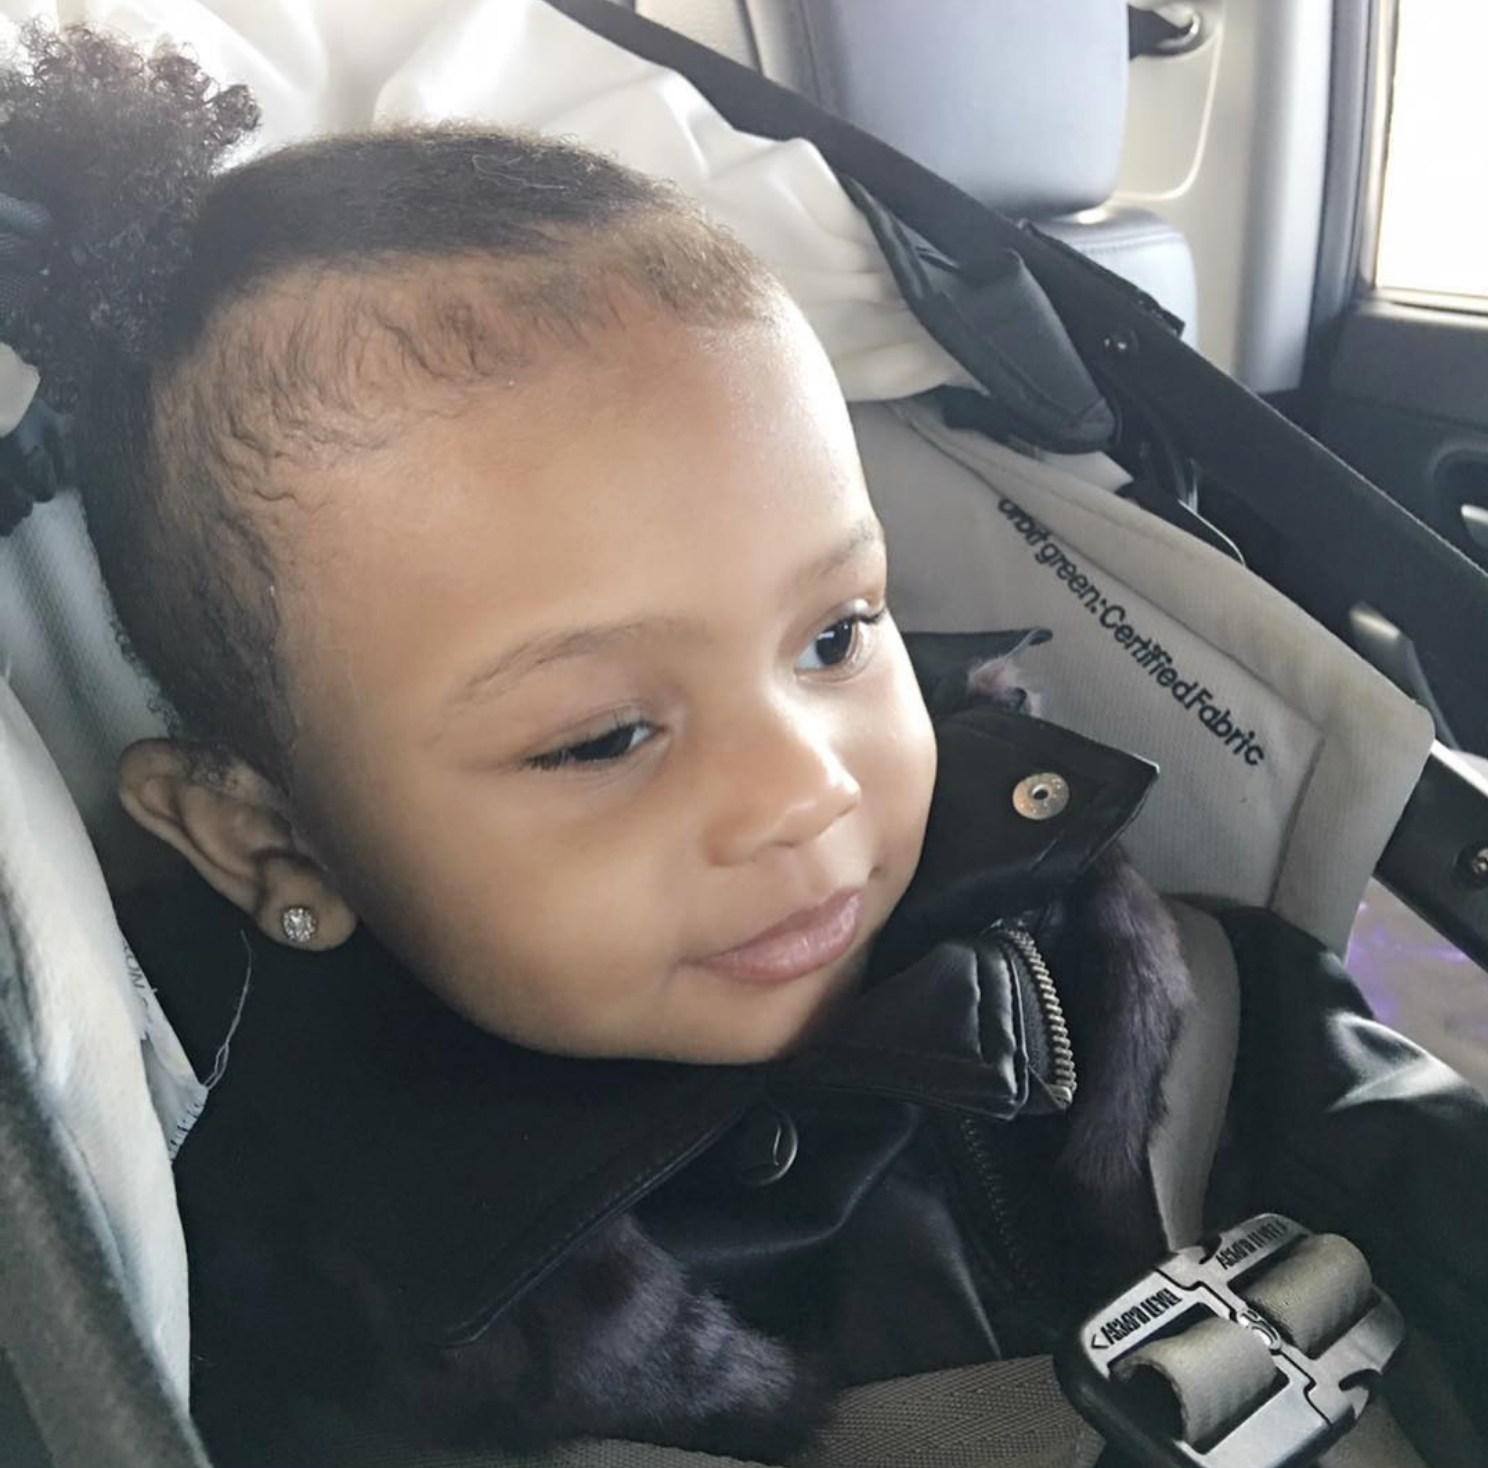 Lil Kim's Daughter Royal Reign Is The Cutest Little Tot On The 'Gram
